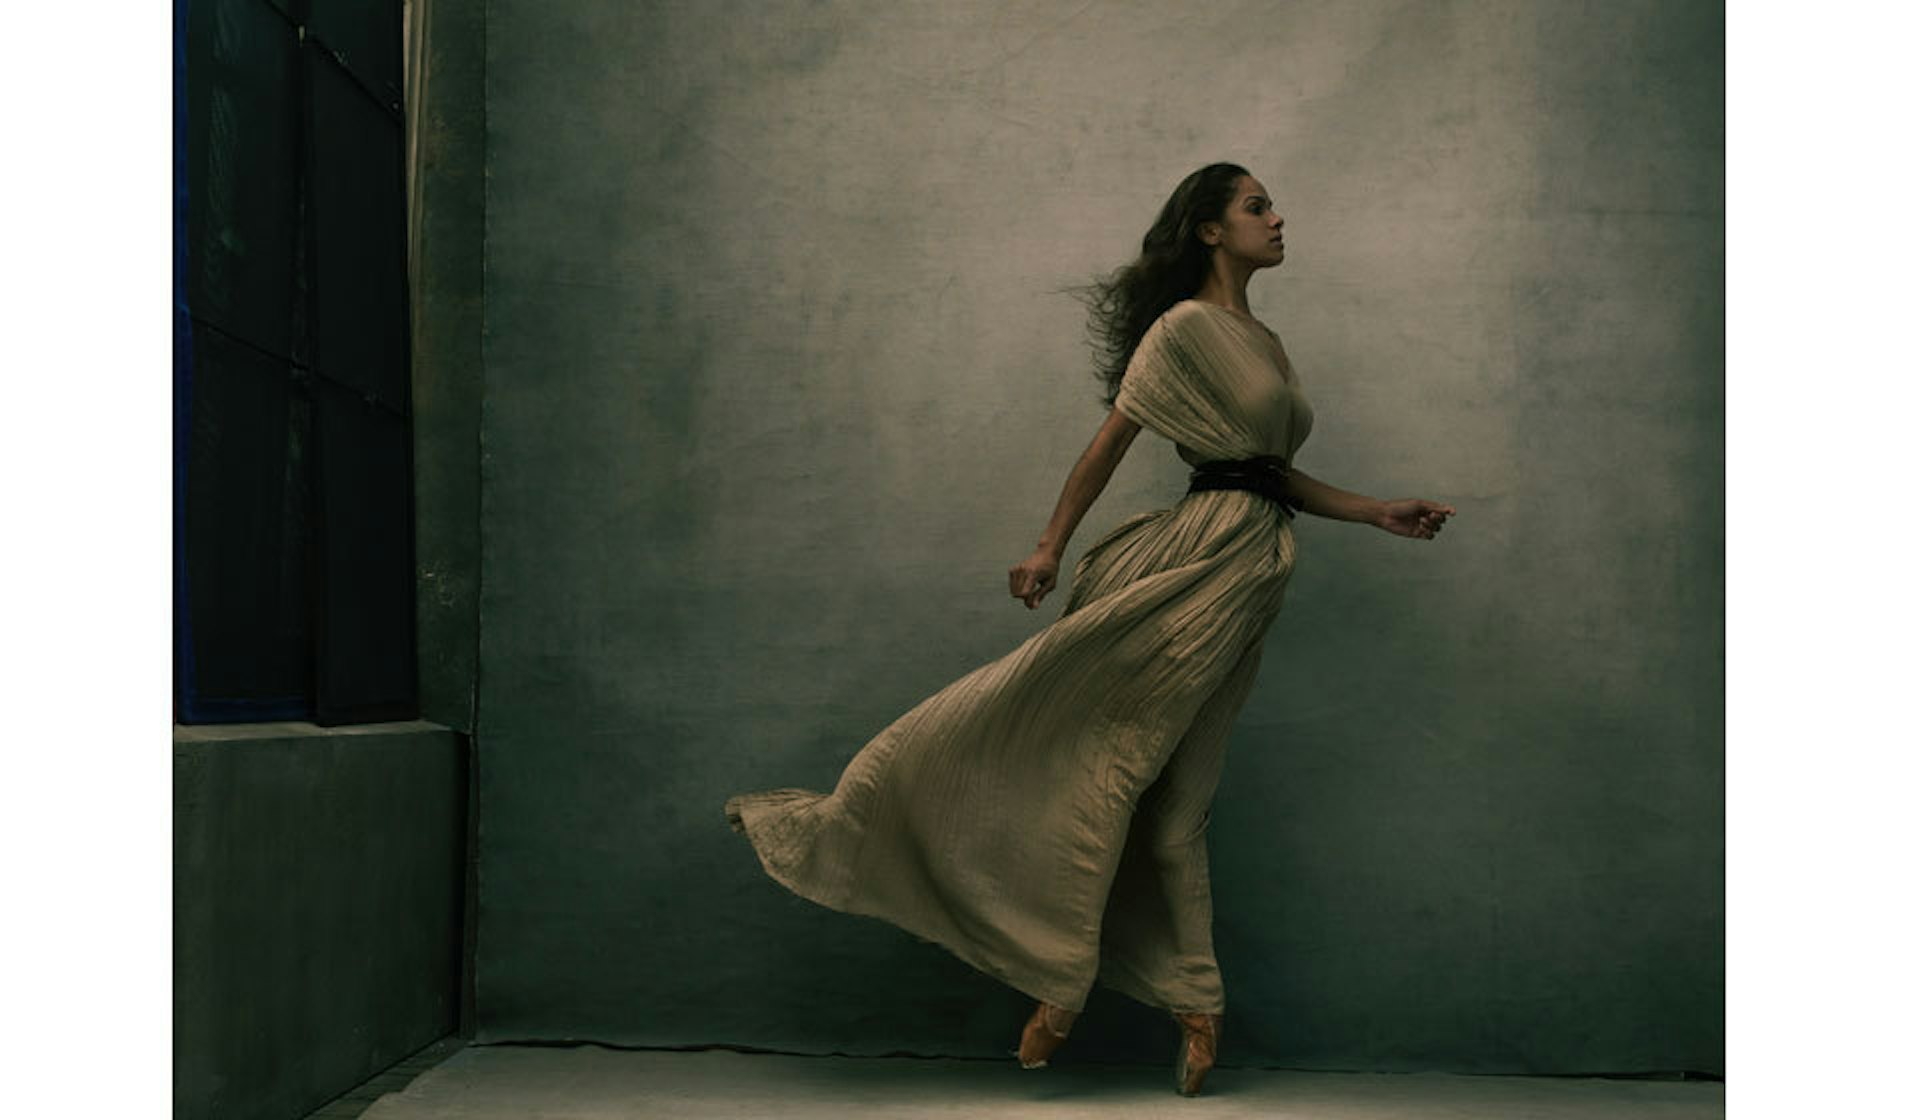 Annie Leibovitz's 'Women' project is an almost-perfect study of humankind in 2016